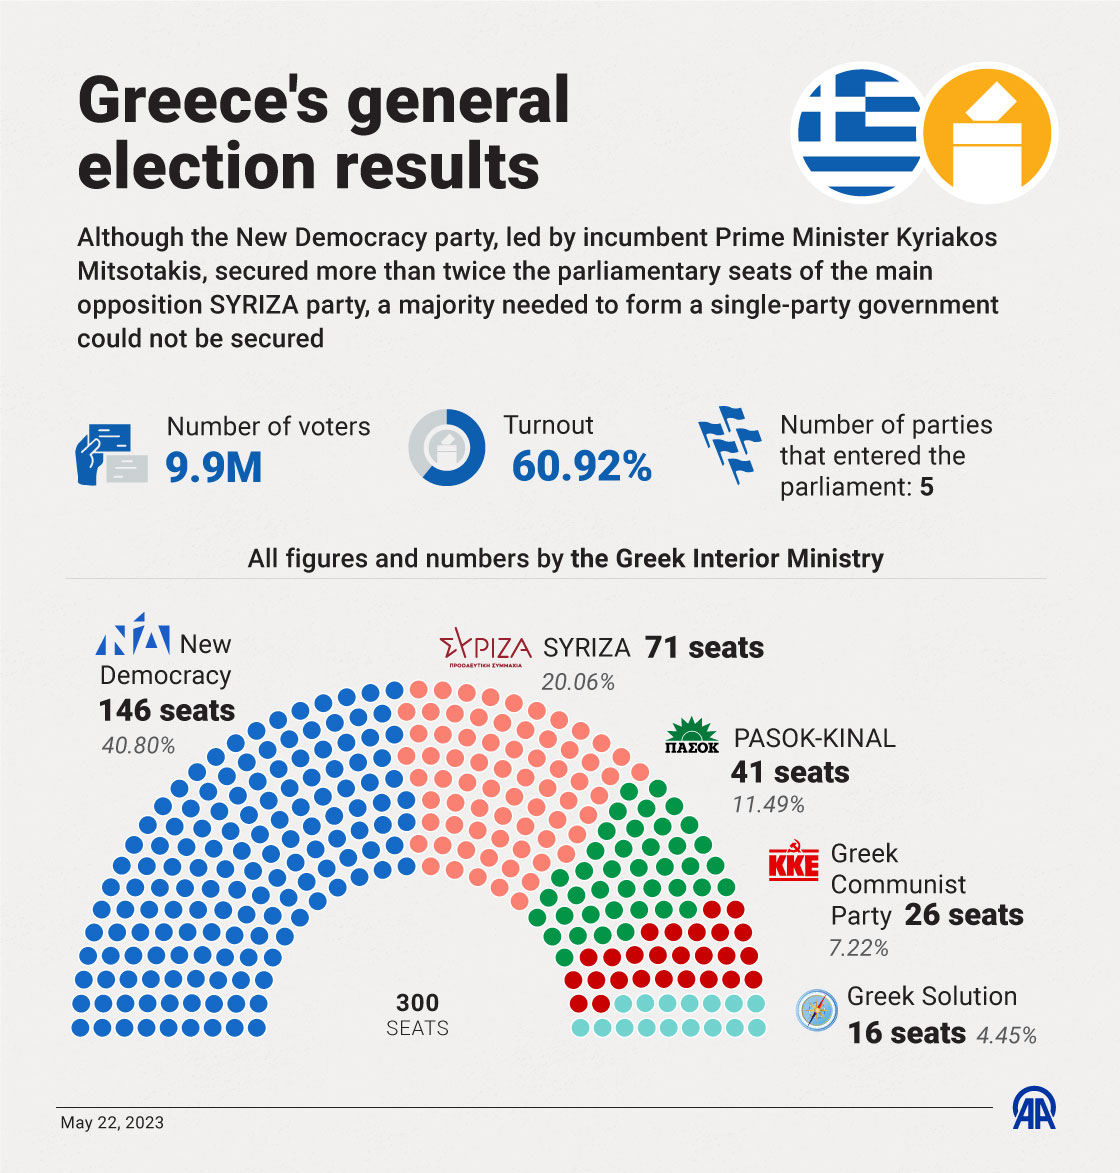 Greece's general election results